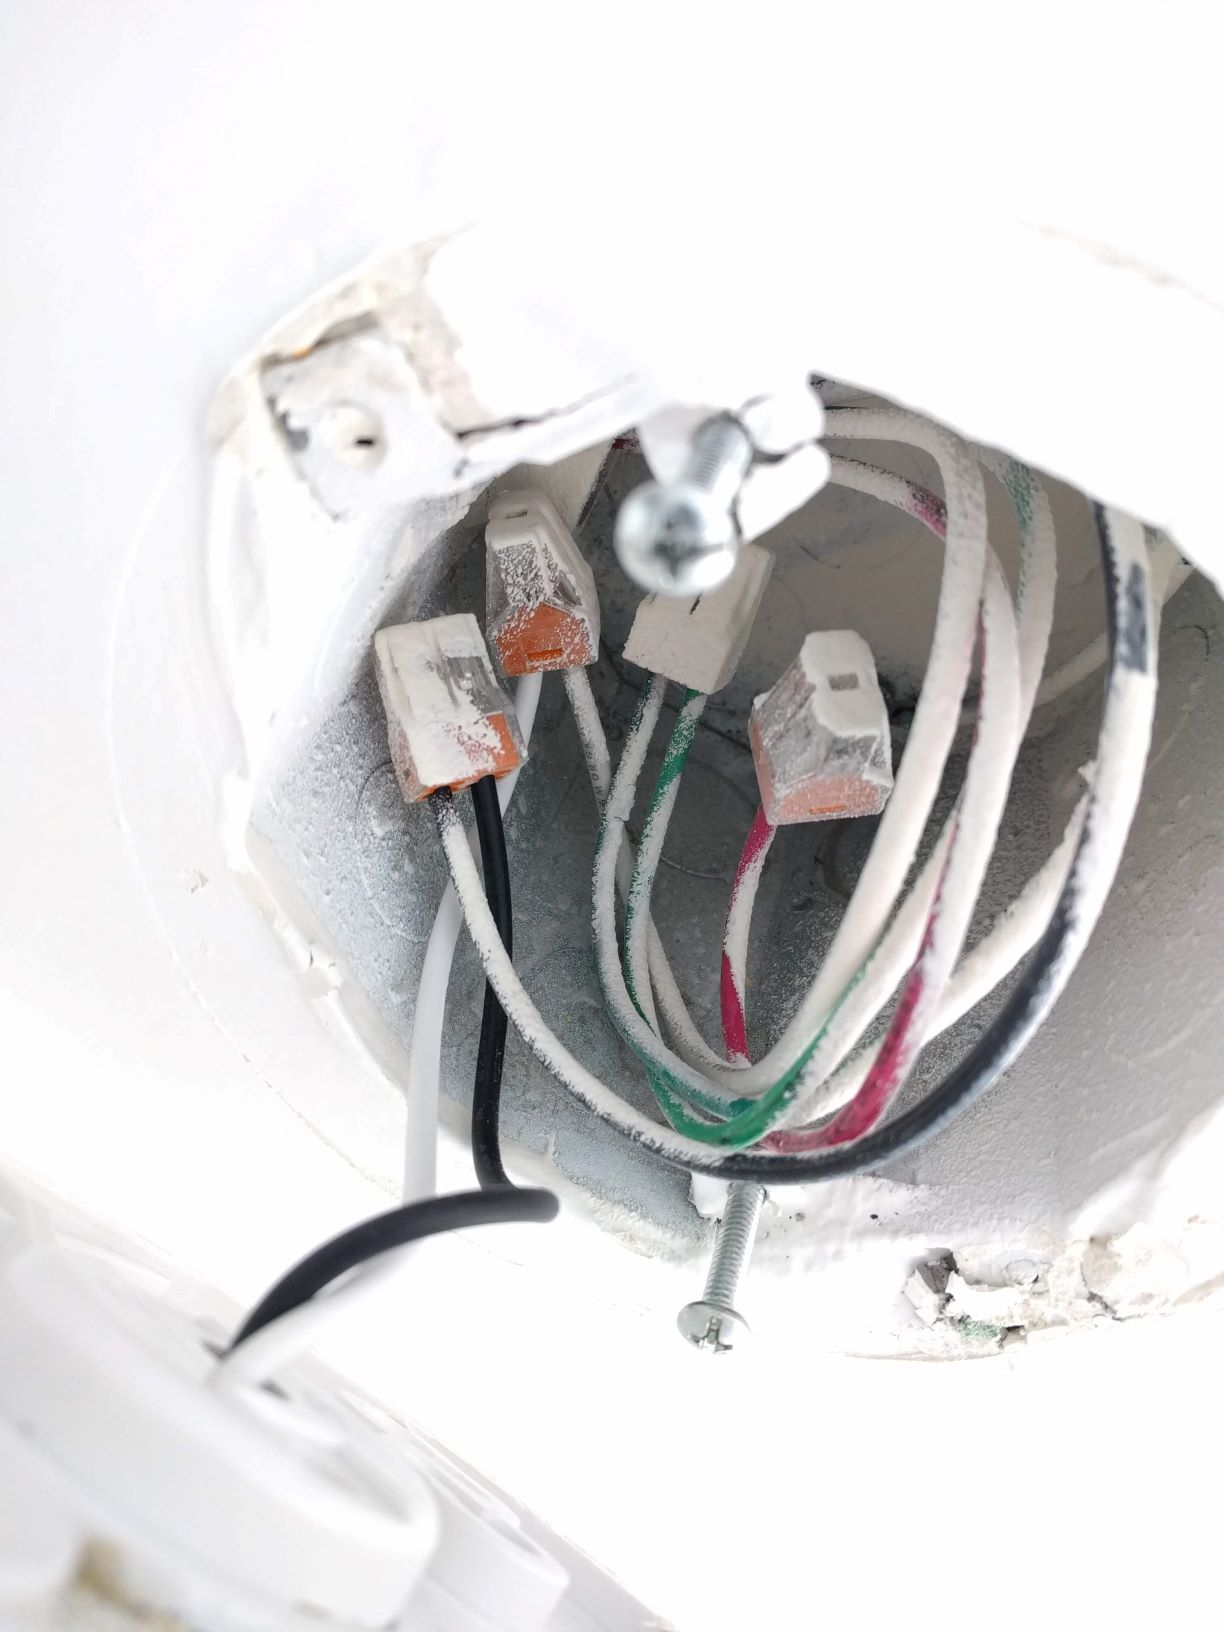 Wiring A Ceiling Fan With Black White Red Green In intended for sizing 1224 X 1632